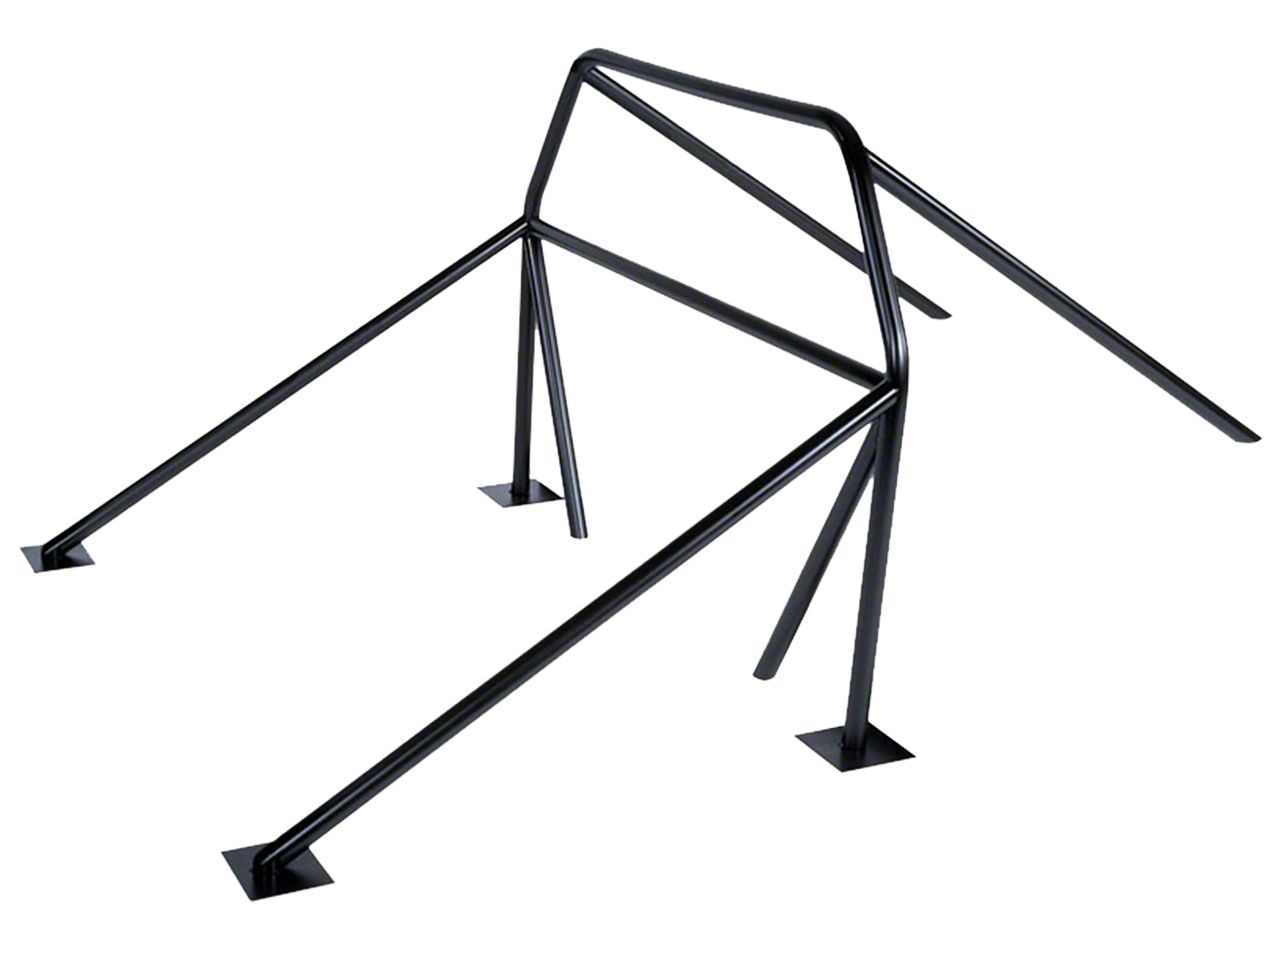 Mustang Roll Bars & Roll Cages 1979-1993